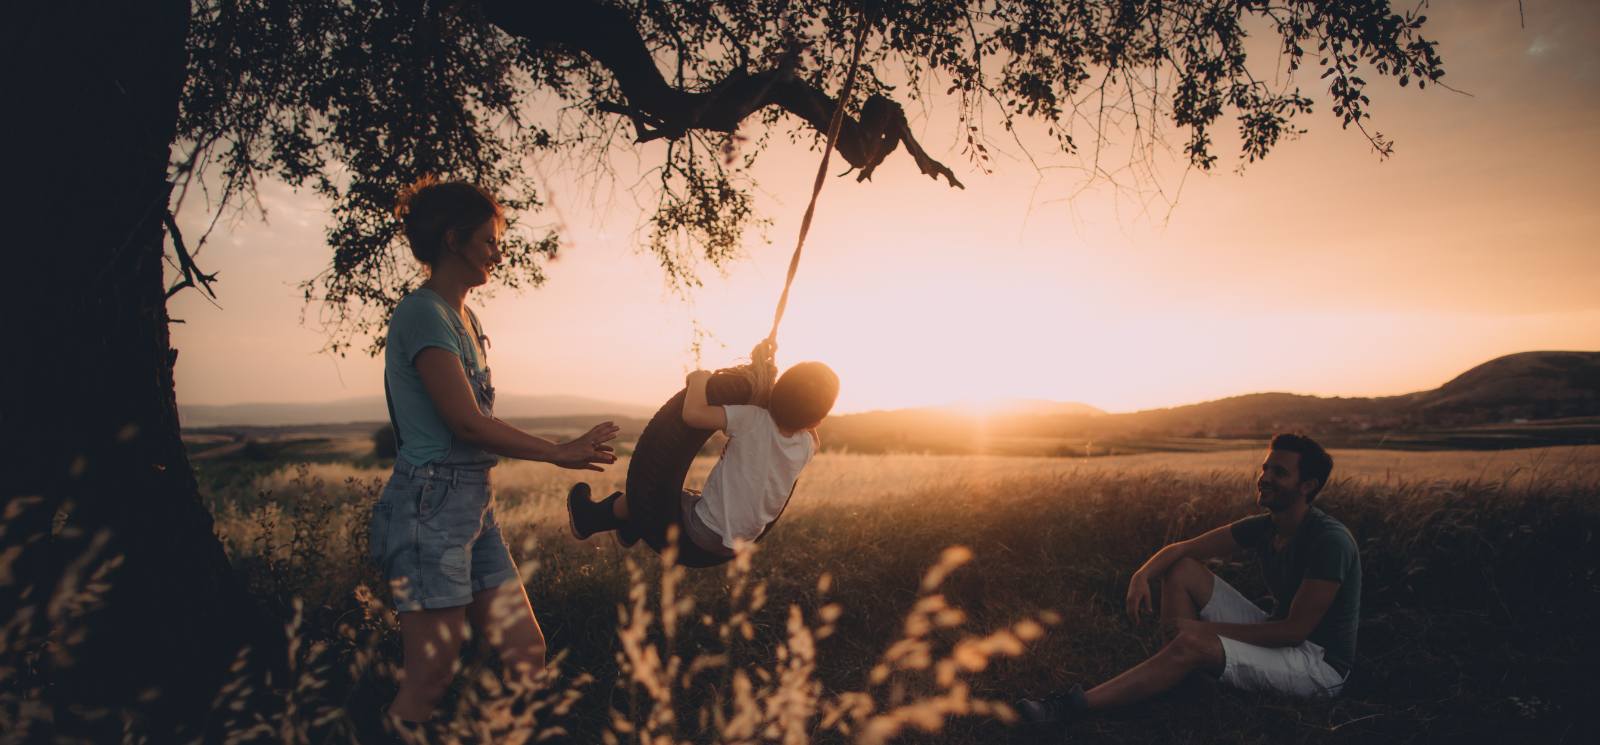 Mom pushing child on tire swing while the sun sets.